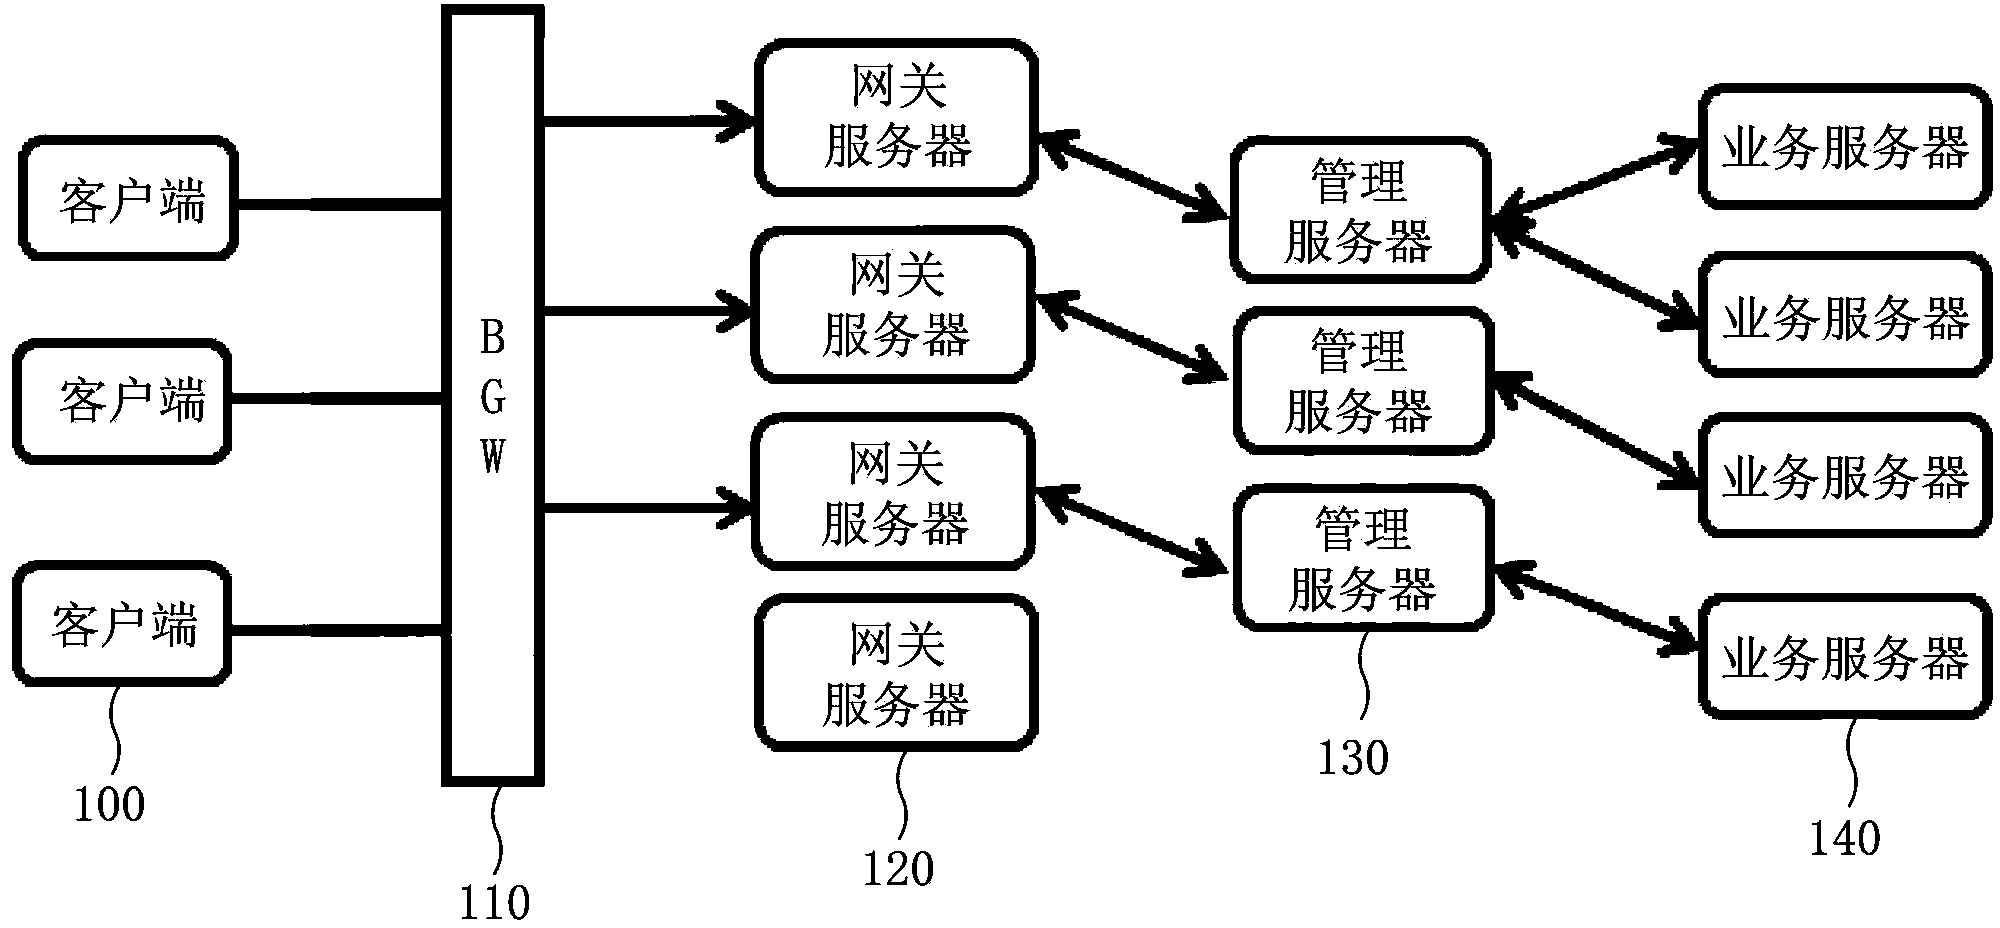 Session handling system and session handling method for long connection